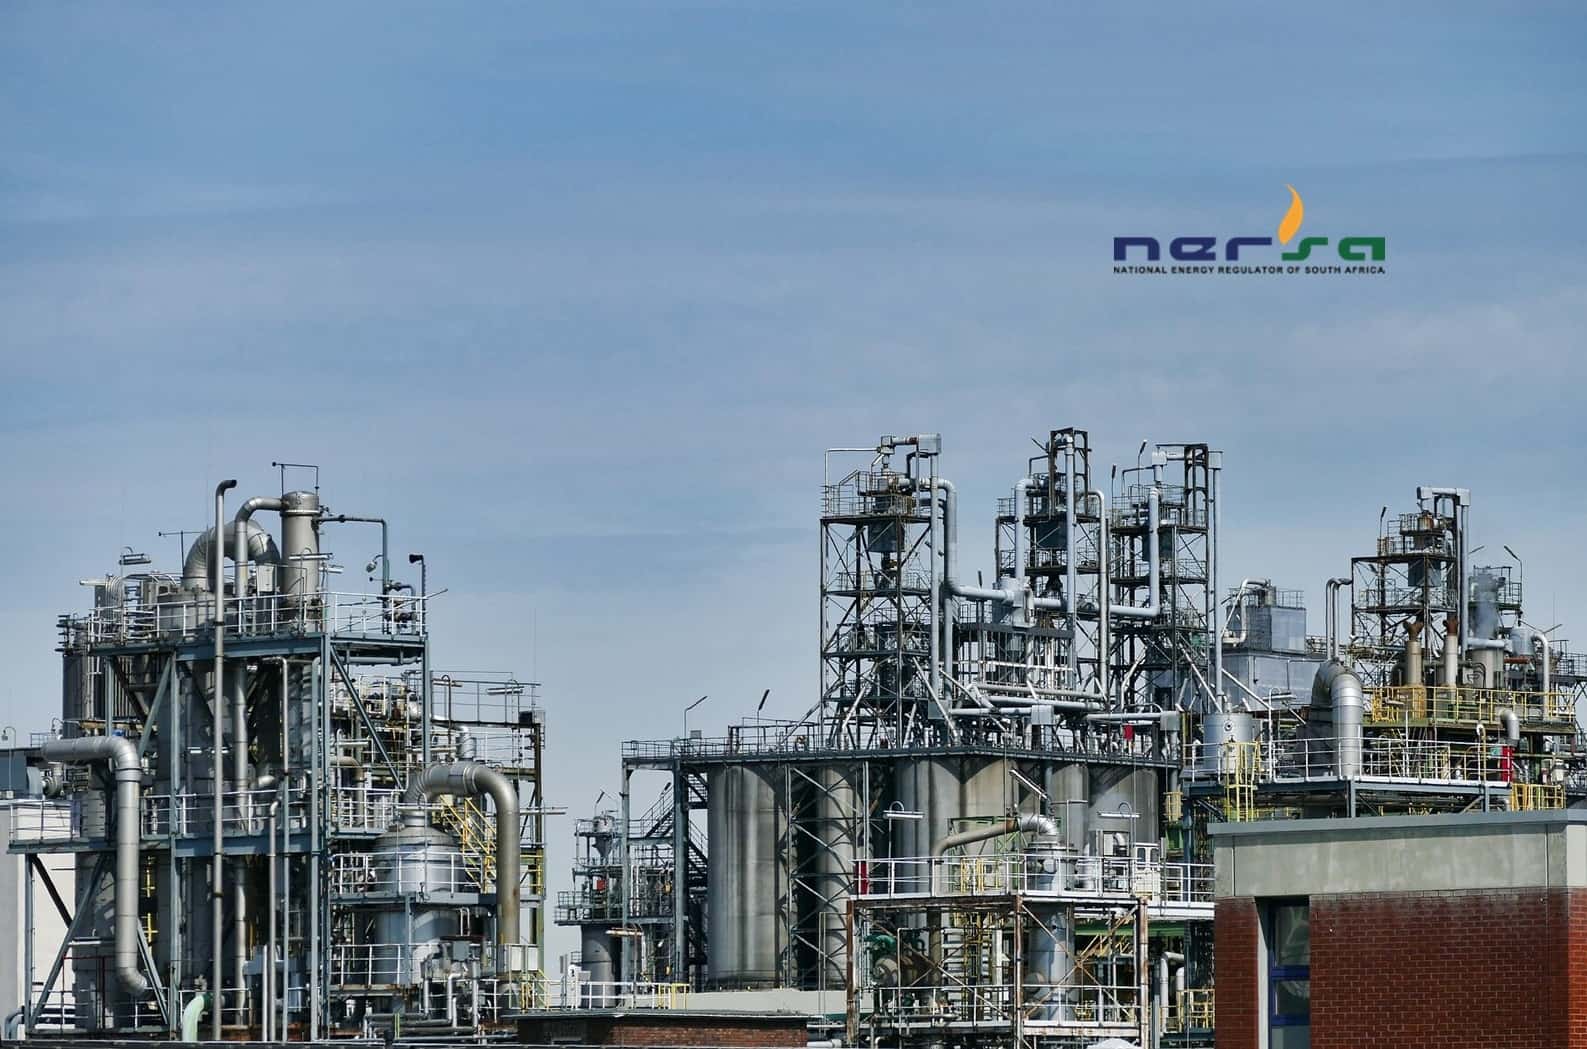 NERSA READY TO APPROVE GAS PROJECTS